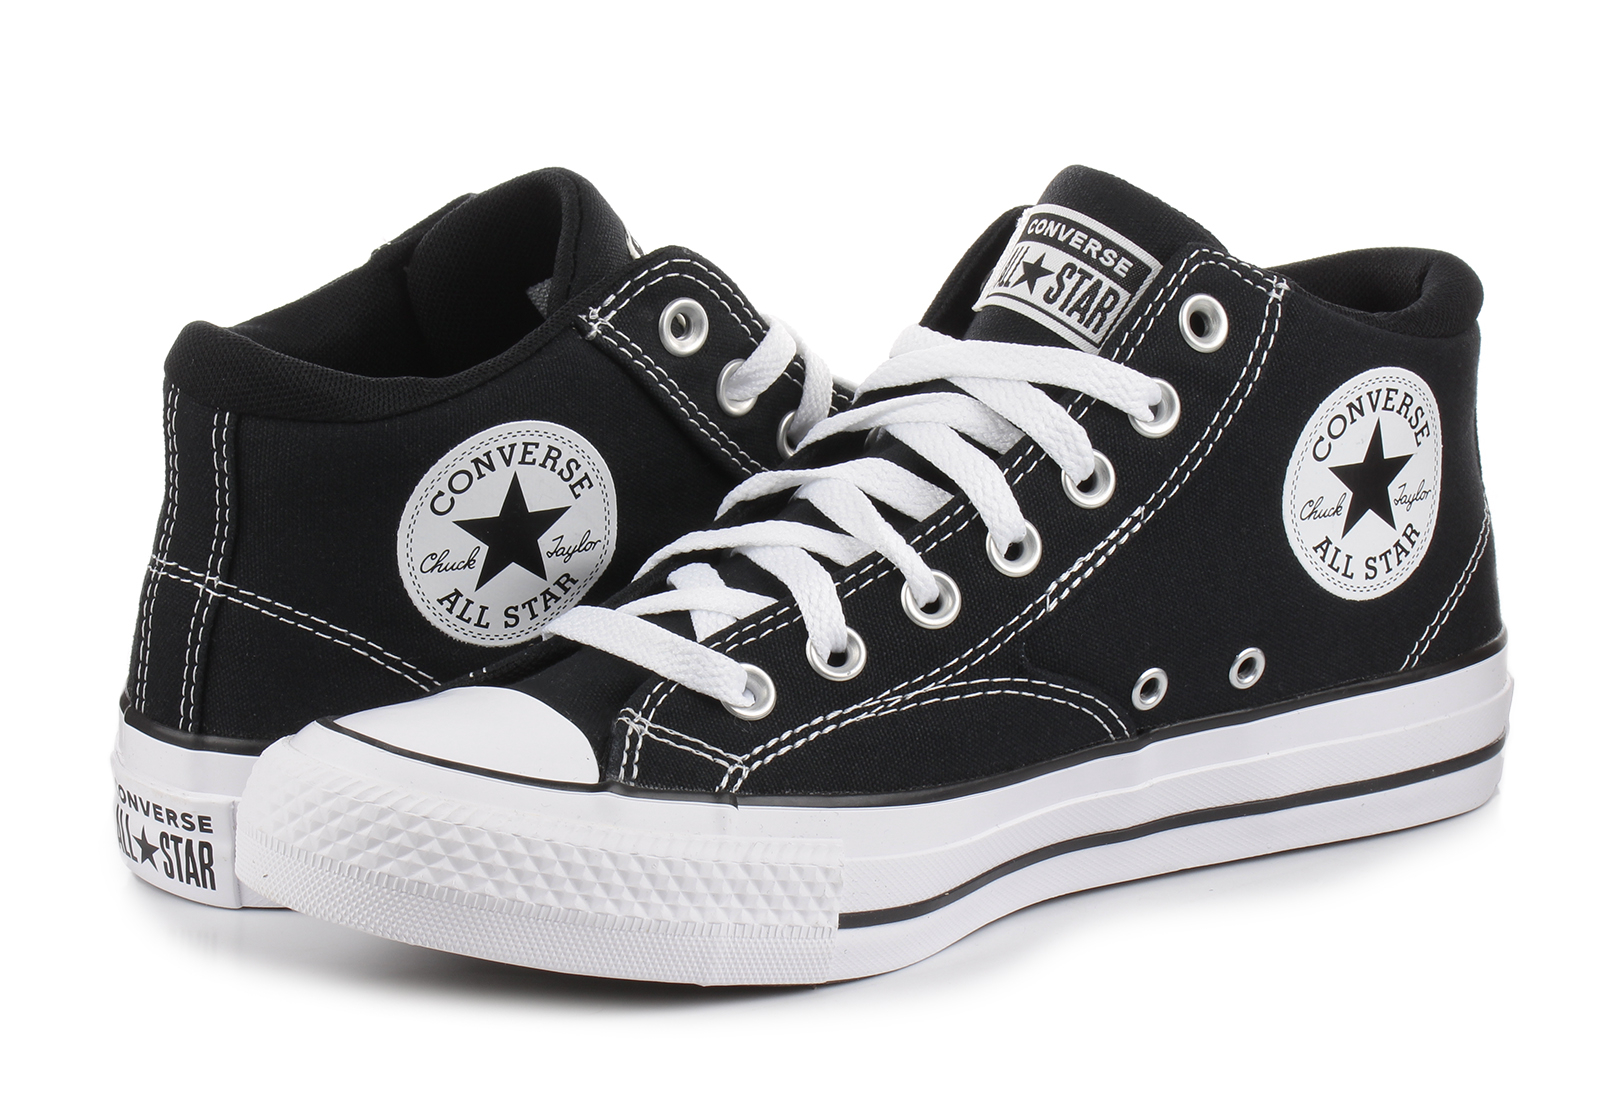 Converse High trainers - Chuck Taylor All Star Malden Street - A00811C -  Online shop for sneakers, shoes and boots